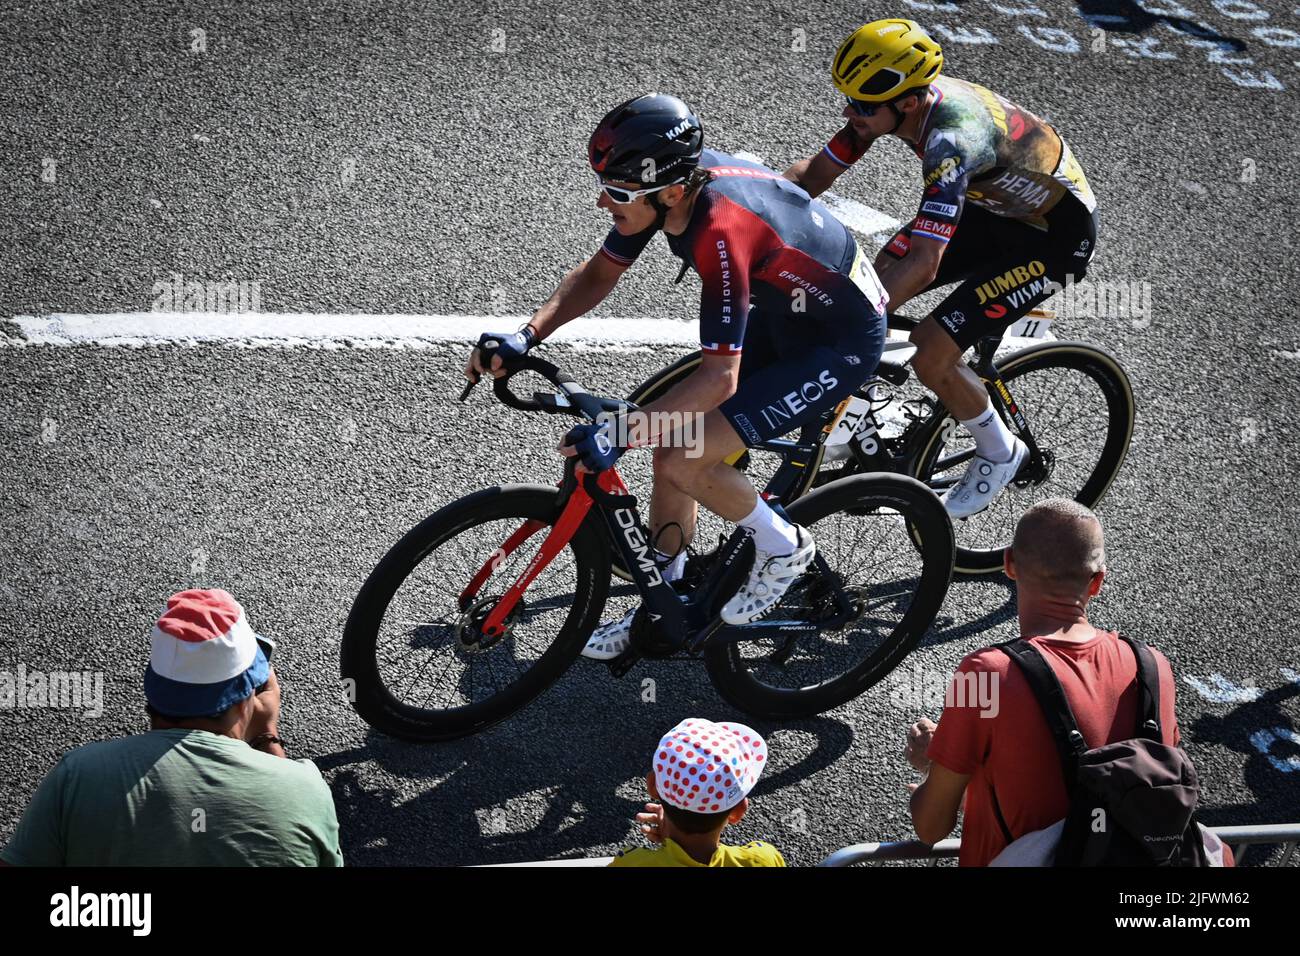 Calais, France,05 July 2022. British Geraint Thomas of Ineos Grenadiers and Slovenian Primoz Roglic of Jumbo-Visma pictured in action during stage four of the Tour de France cycling race, a 171.5 km race from Dunkerque to Calais, France on Tuesday 05 July 2022. This year's Tour de France takes place from 01 to 24 July 2022. BELGA PHOTO DAVID STOCKMAN - UK OUT Stock Photo